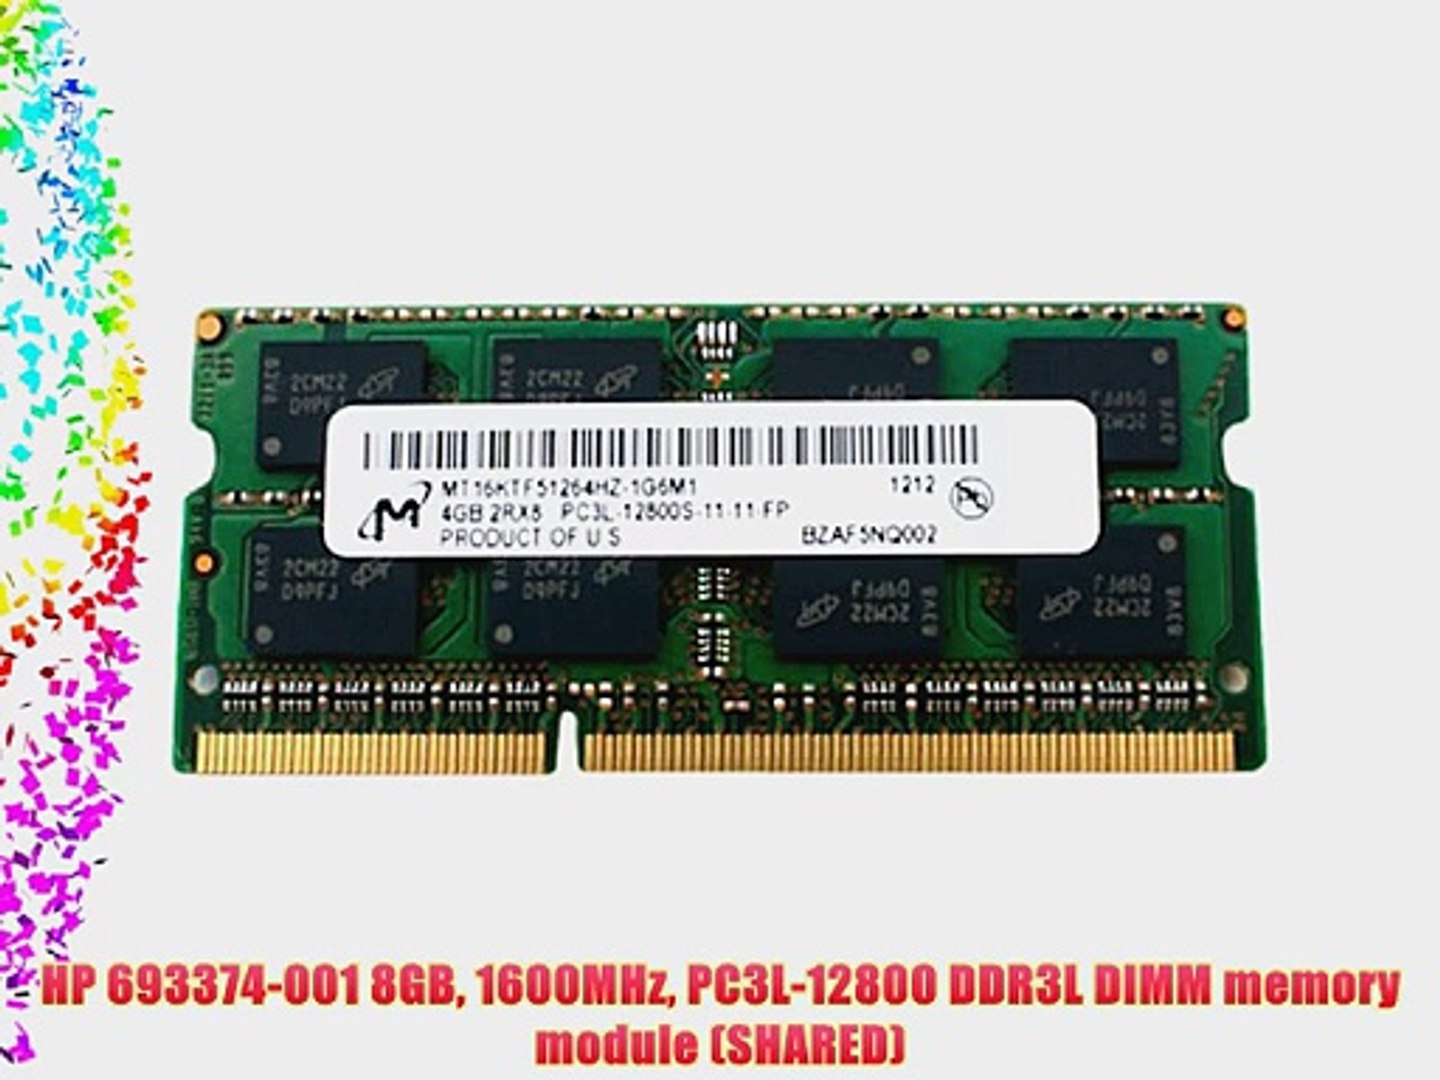 Hp 001 8gb 1600mhz Pc3l Ddr3l Dimm Memory Module Shared Video Dailymotion